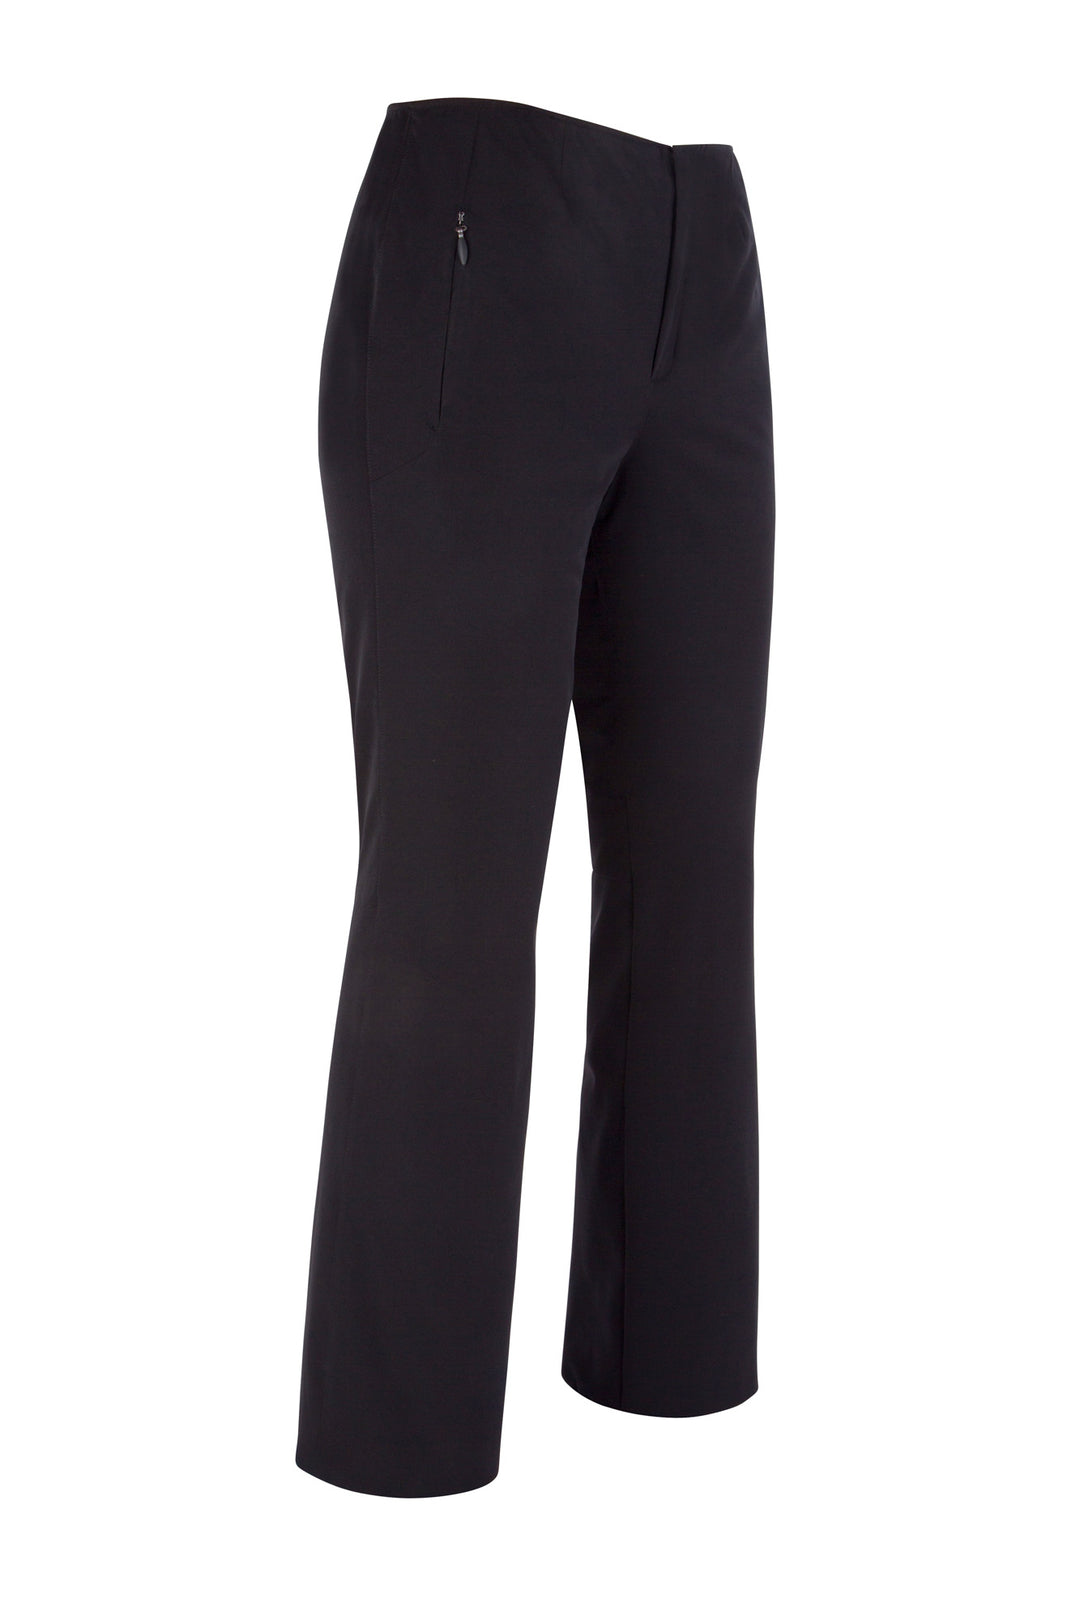 Heaven Stretch Insulated Pant X-Sizes